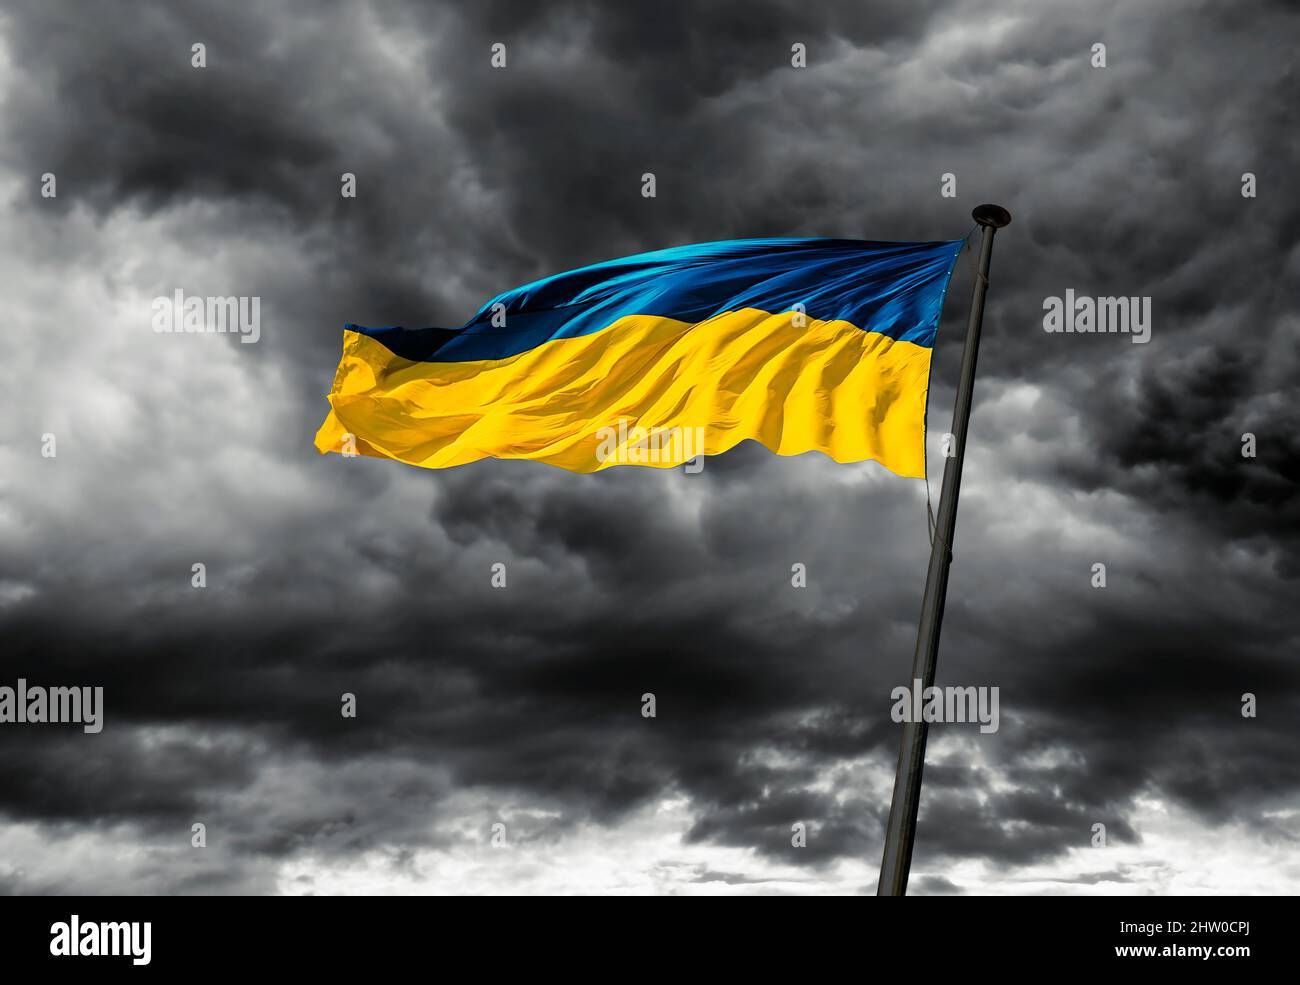 A Ukrainian flag flutters in the wind against a dark cloudy sky. Stock Photo